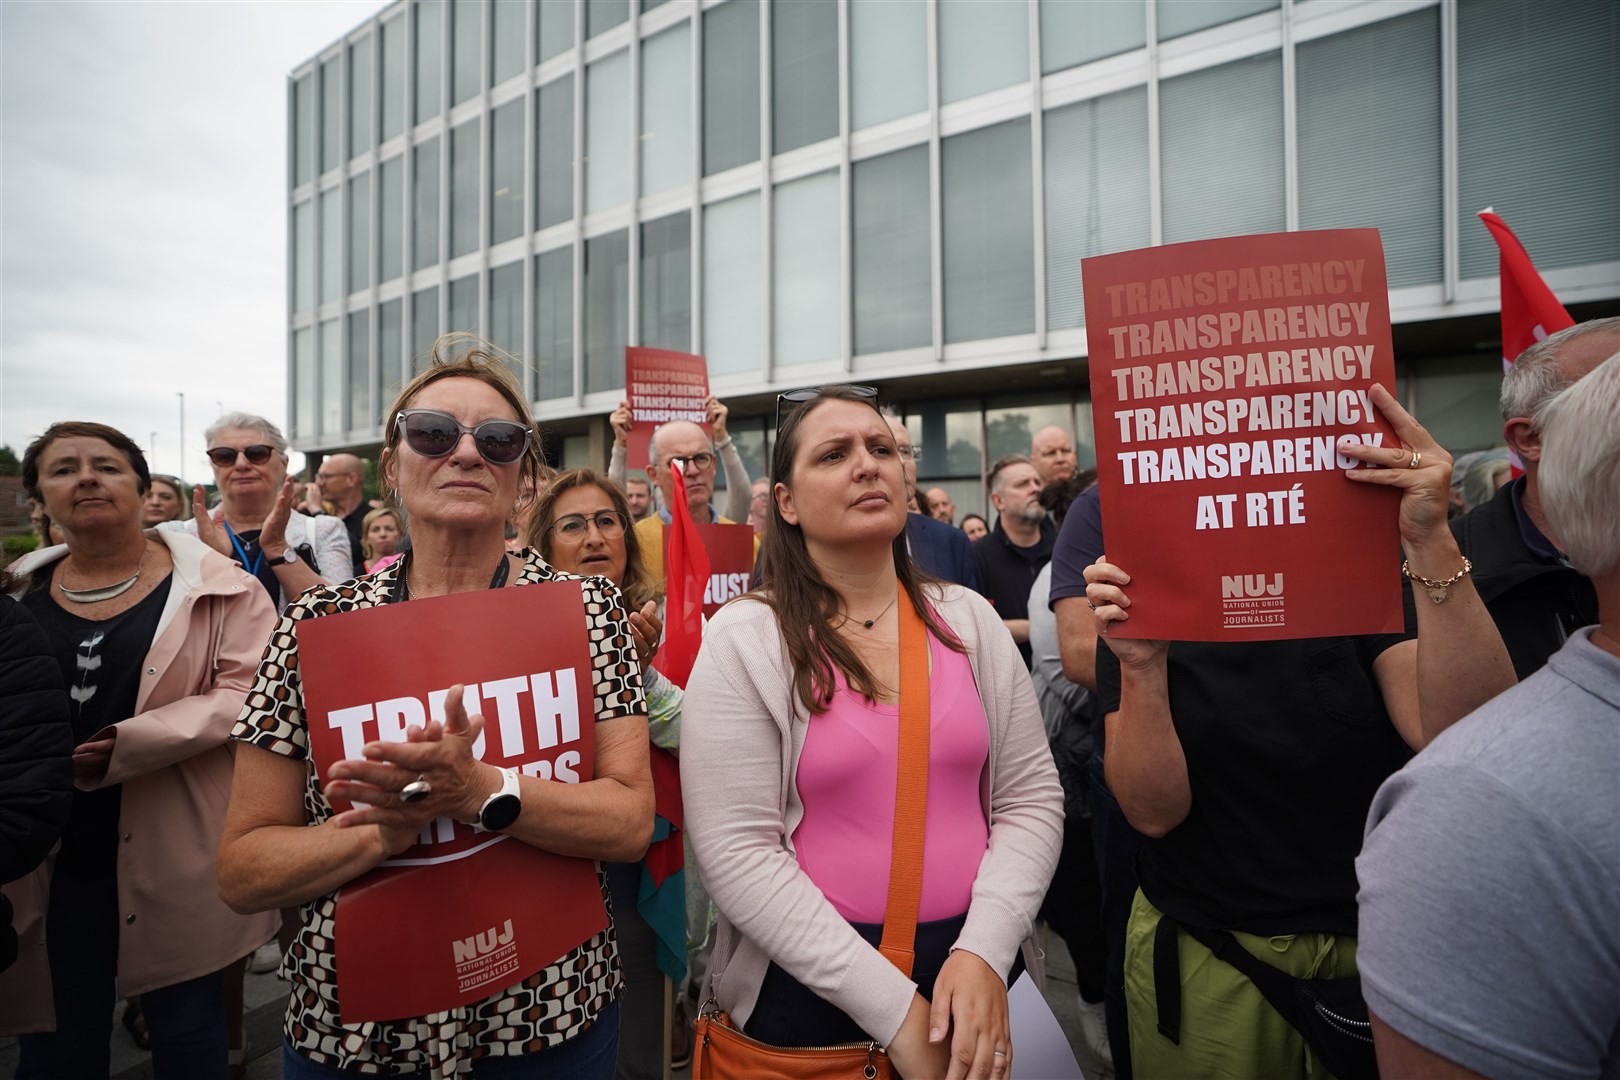 Members of staff from RTE take part in a protest at the broadcaster’s headquarters in Donnybrook (PA/Niall Carson)